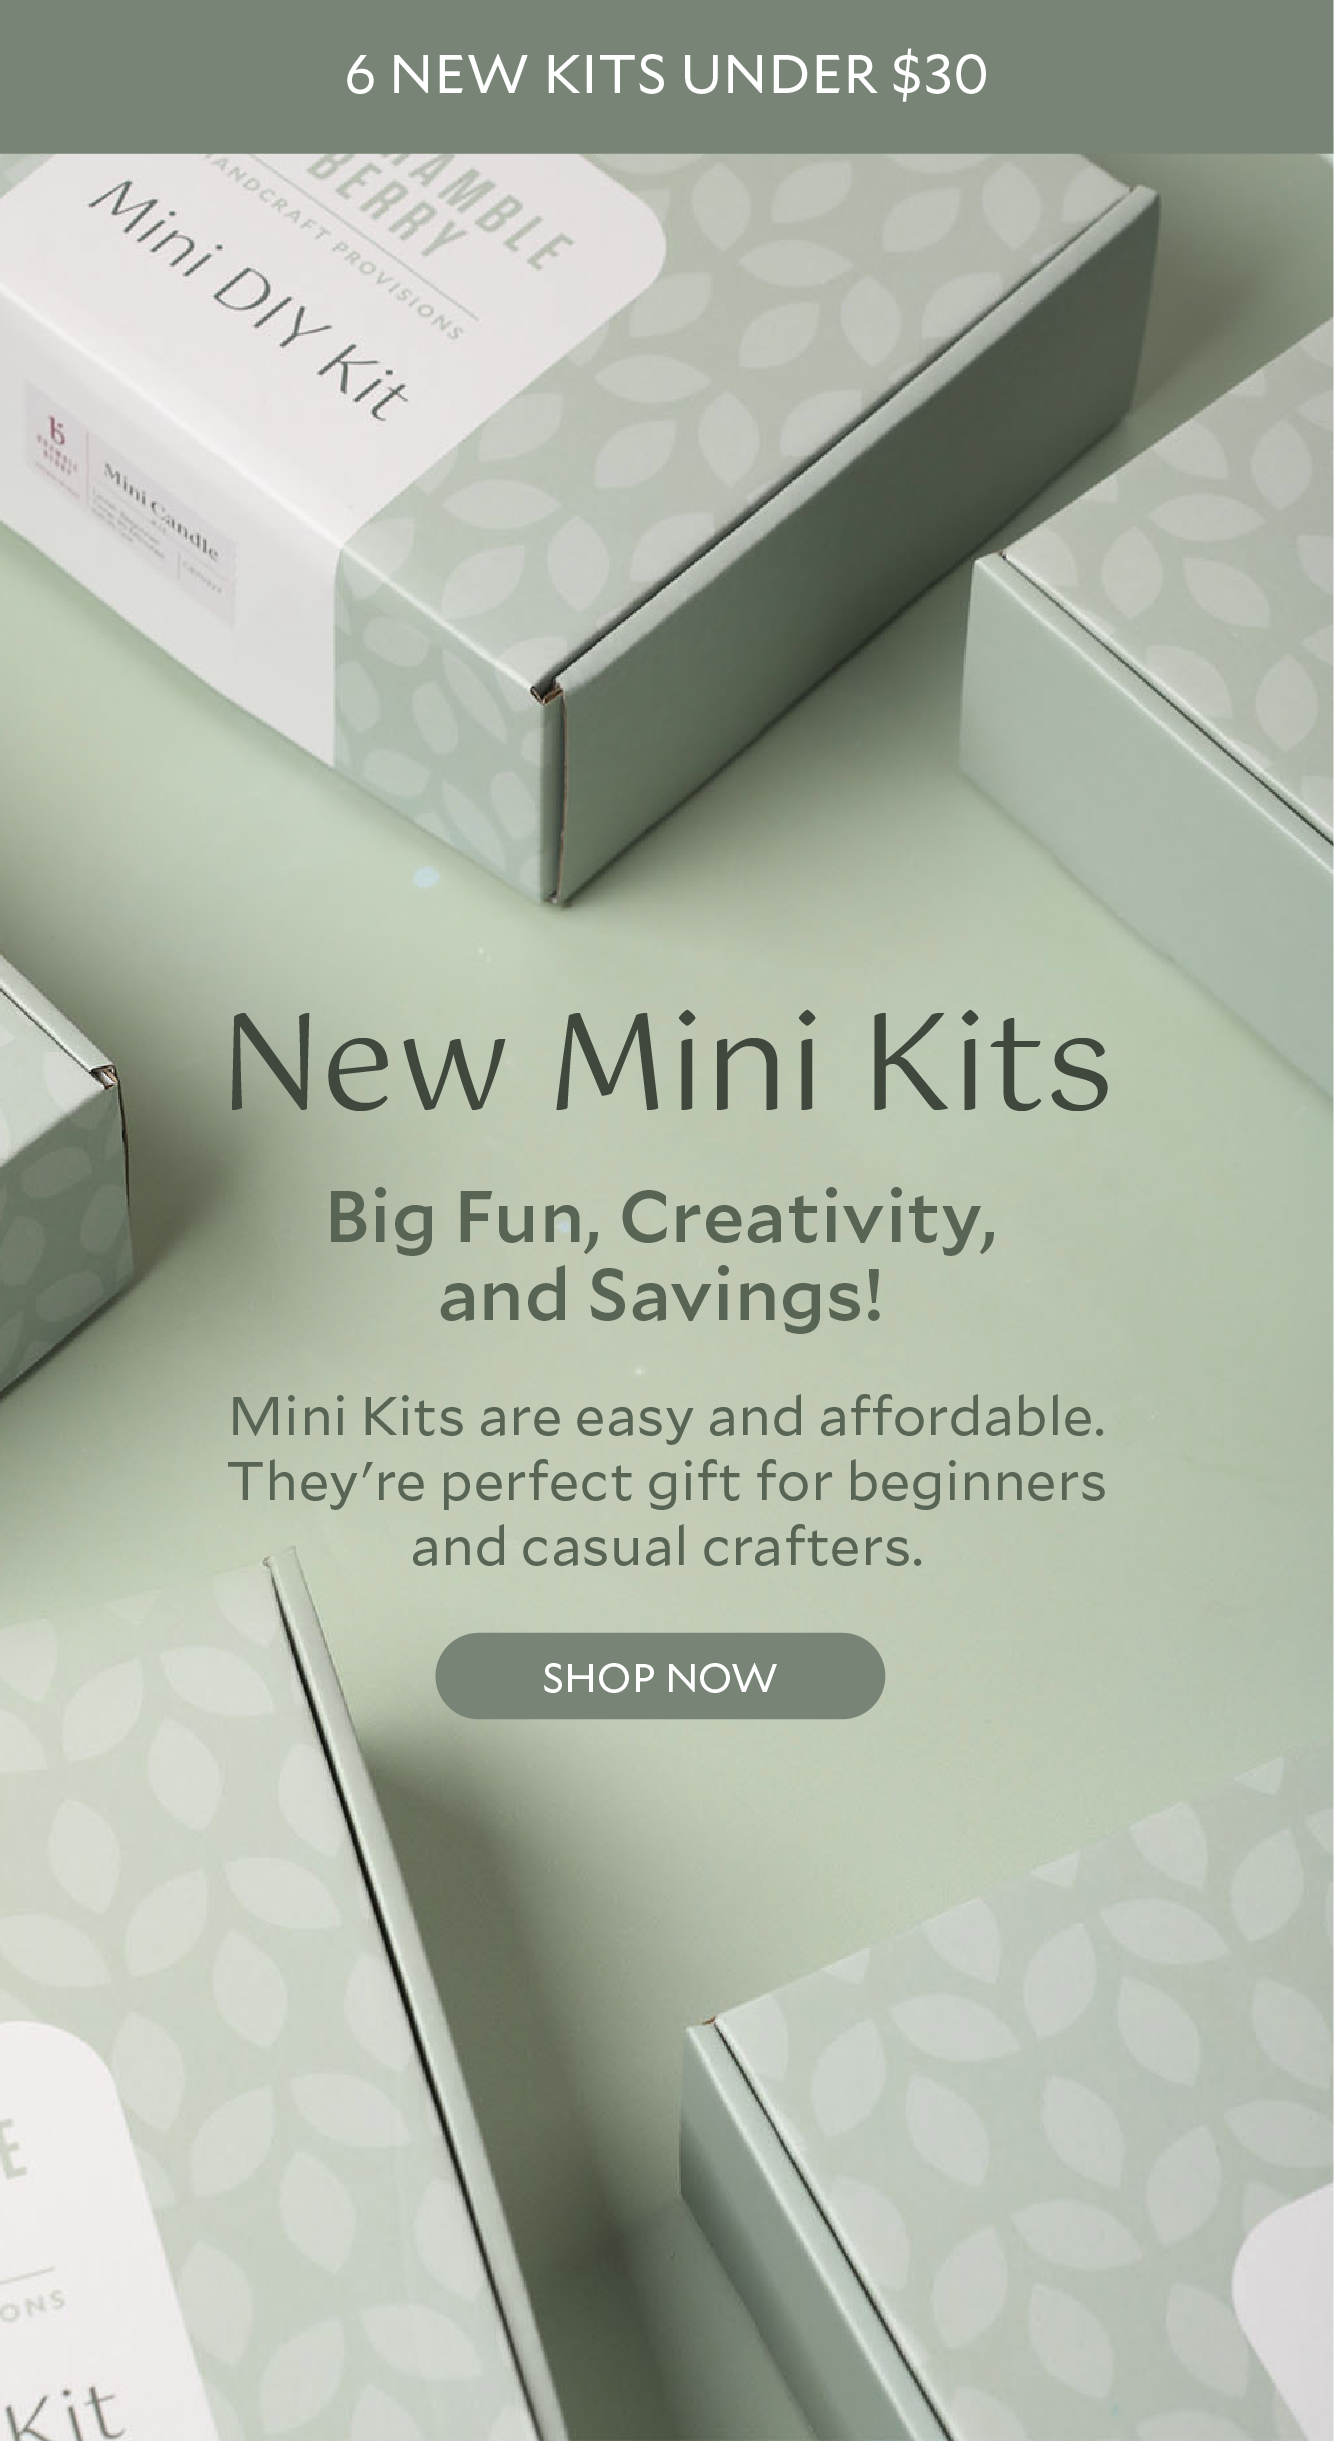 Try our new Mini Kits!